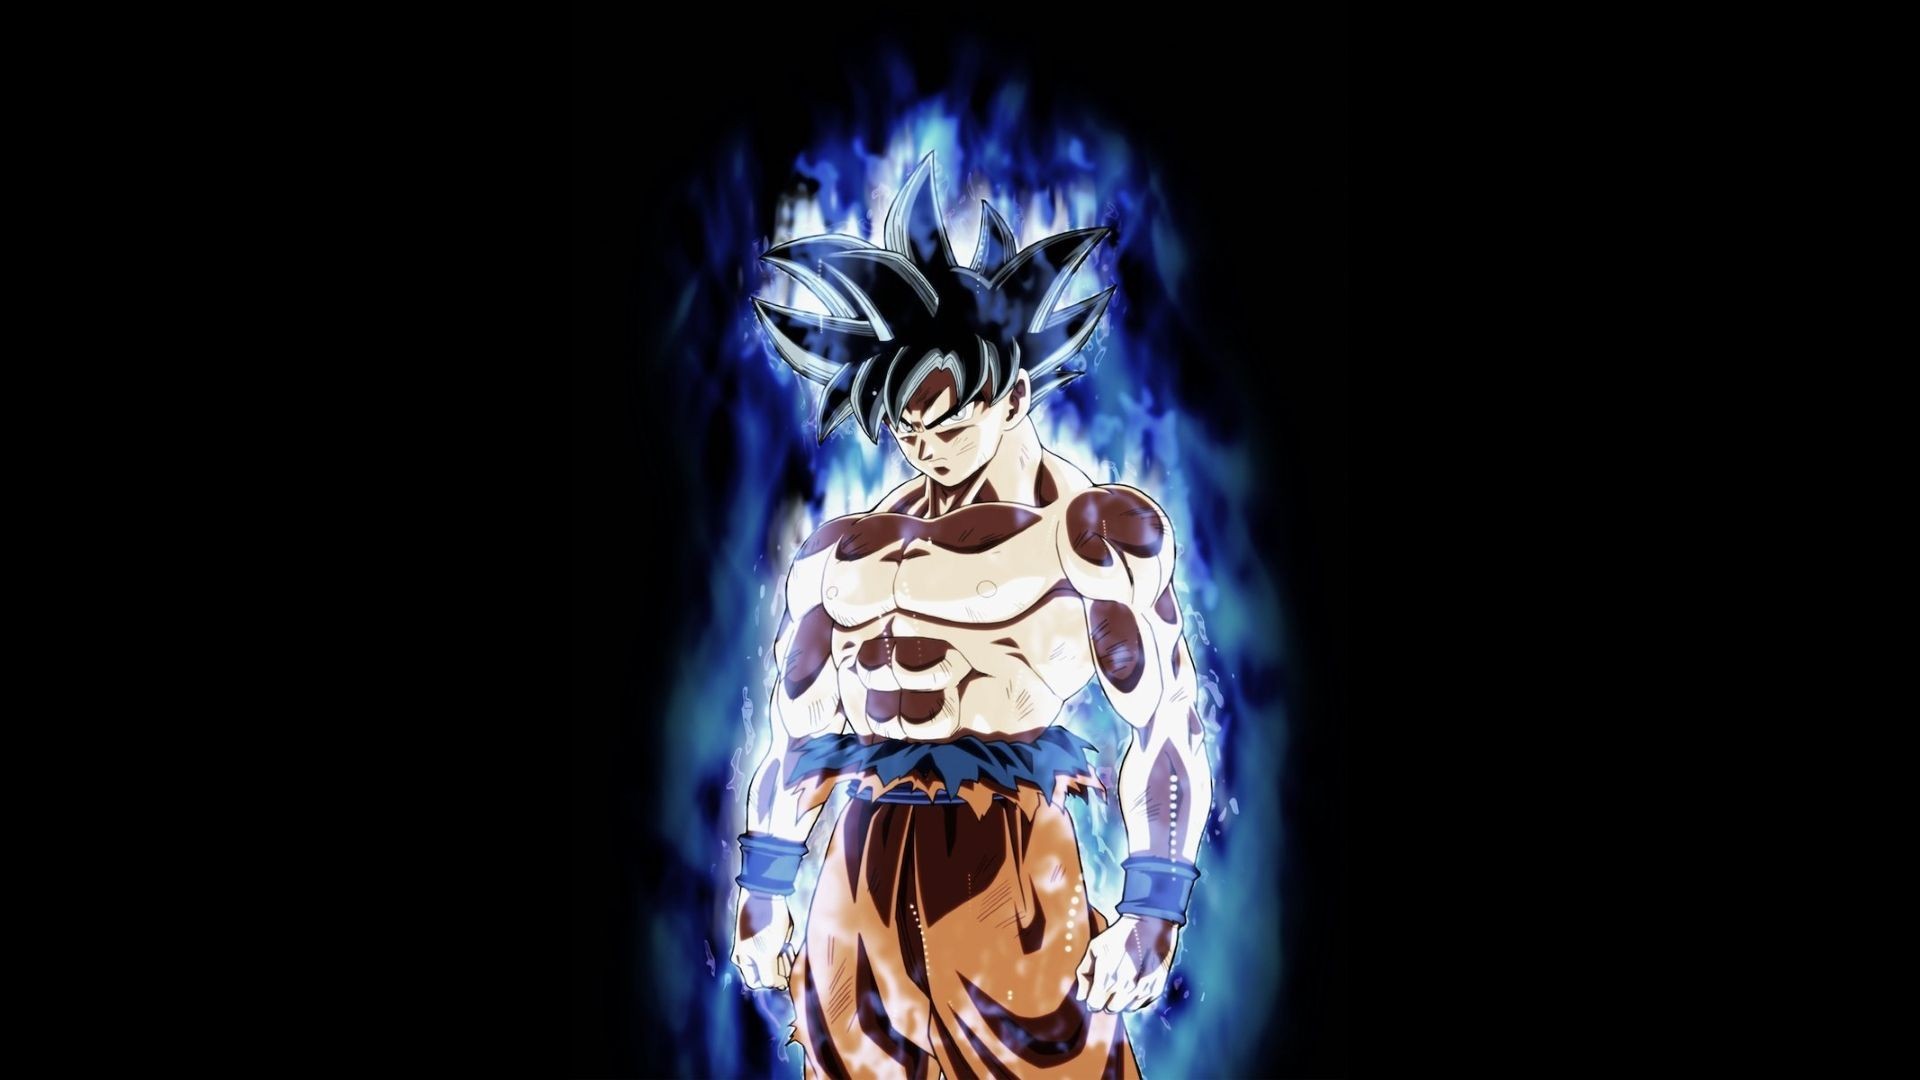 HD Wallpaper Goku Images with image resolution 1920x1080 pixel. You can make this wallpaper for your Desktop Computer Backgrounds, Mac Wallpapers, Android Lock screen or iPhone Screensavers